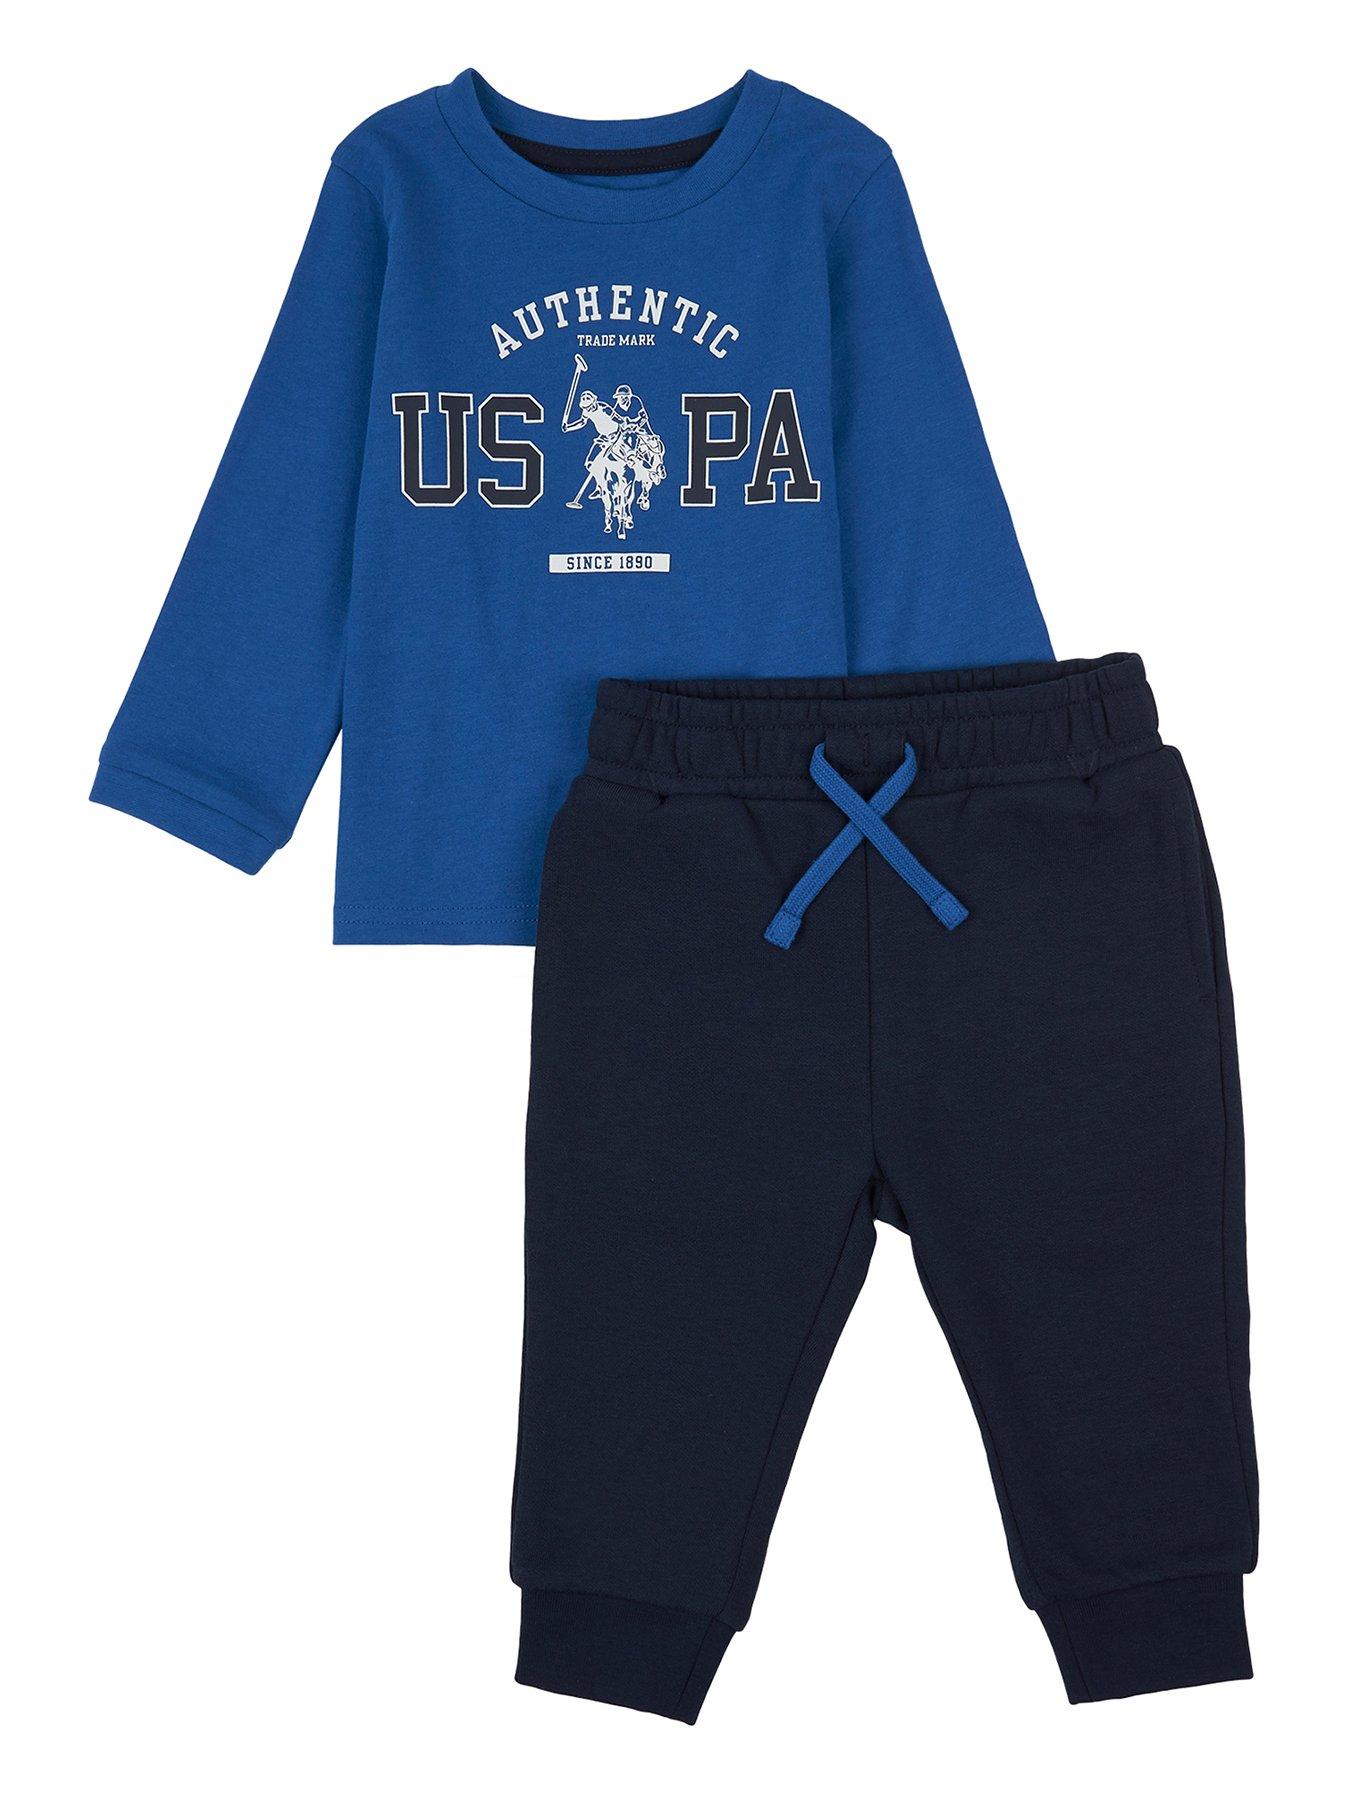 US Polo Assn Baby Boys L/S Top 2pc Denim Overall Set 